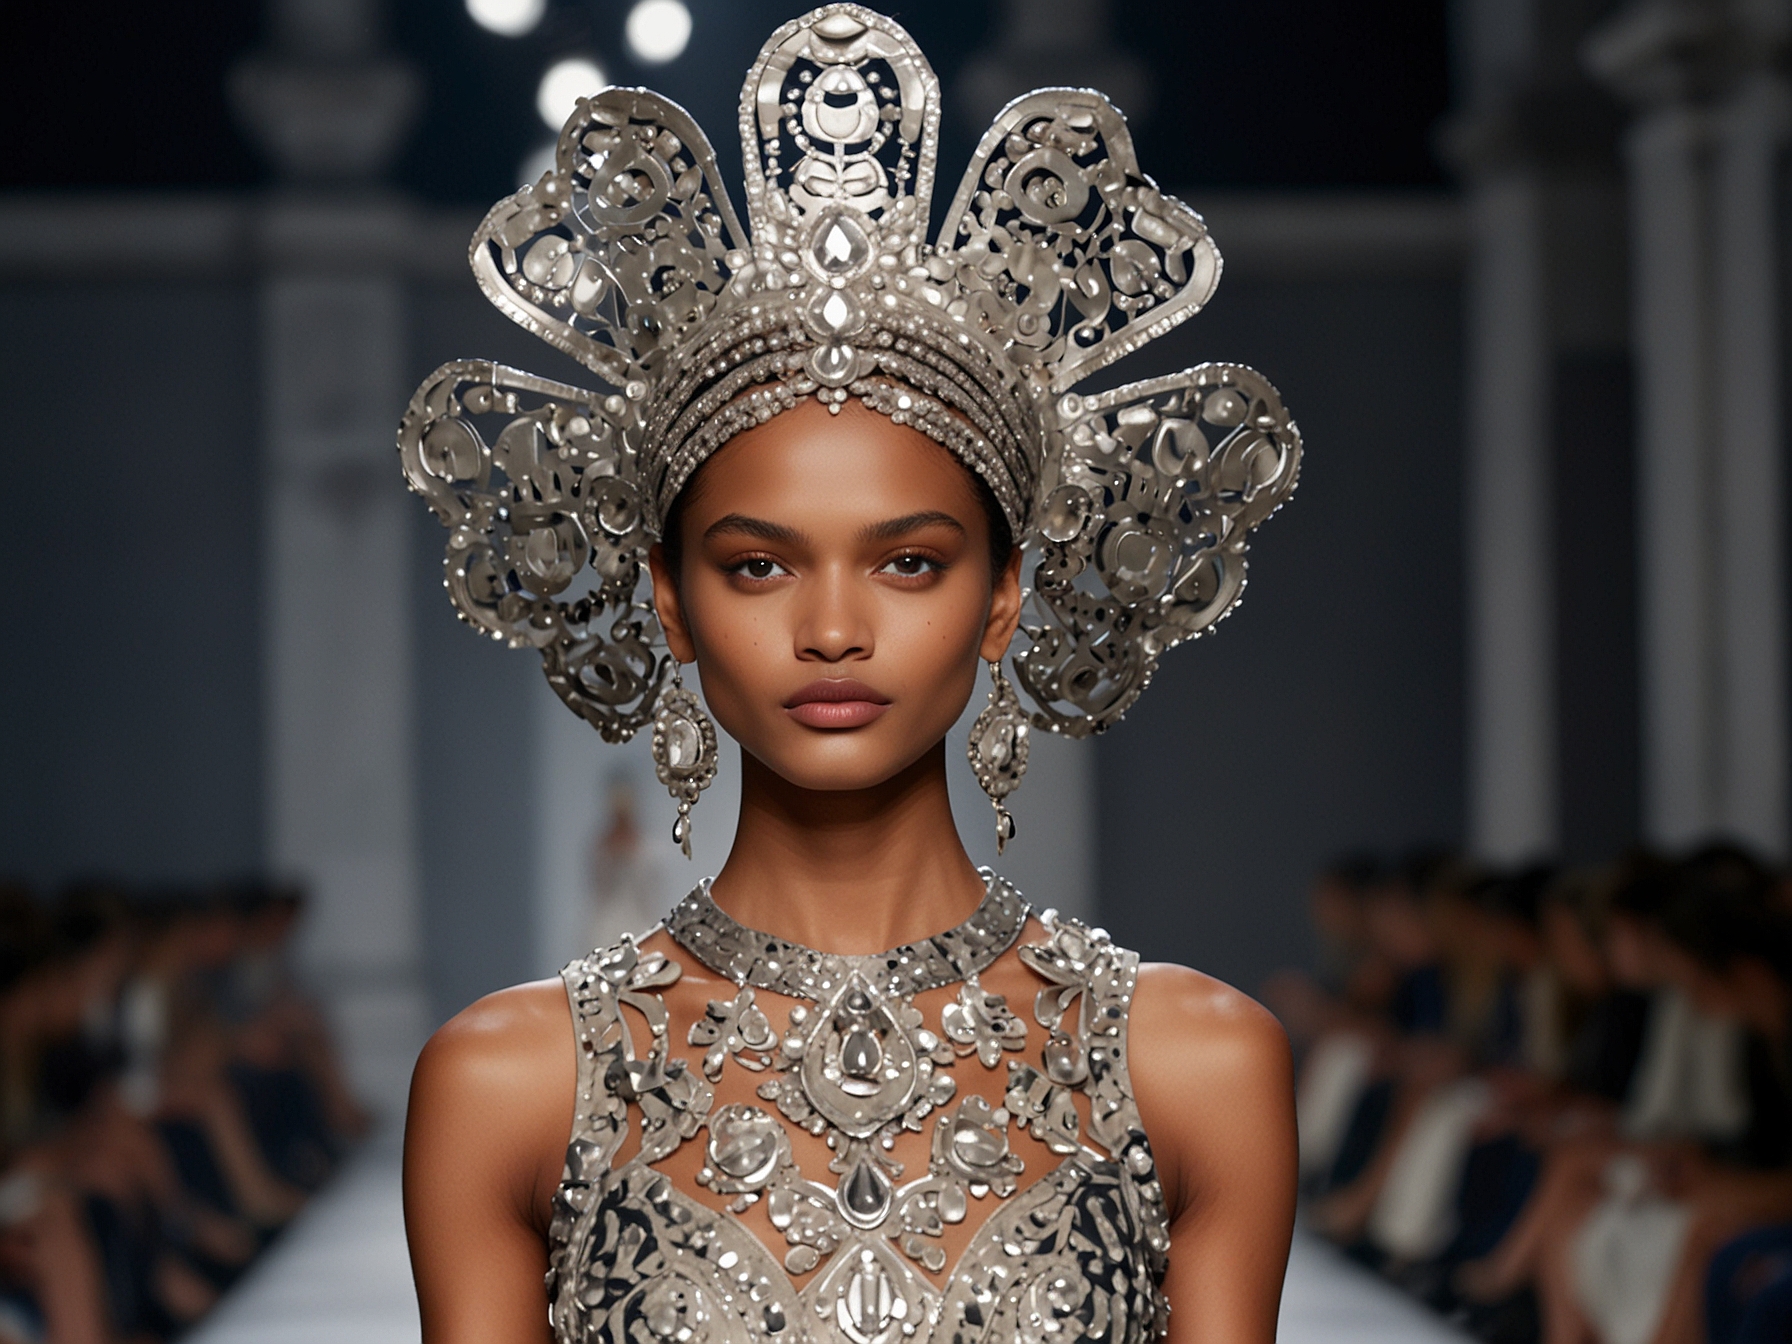 An exquisite dress designed by Rahul Mishra featuring a headgear inspired by Lord Brahma, with sequinned heads that captivate the audience at Paris Fashion Week.